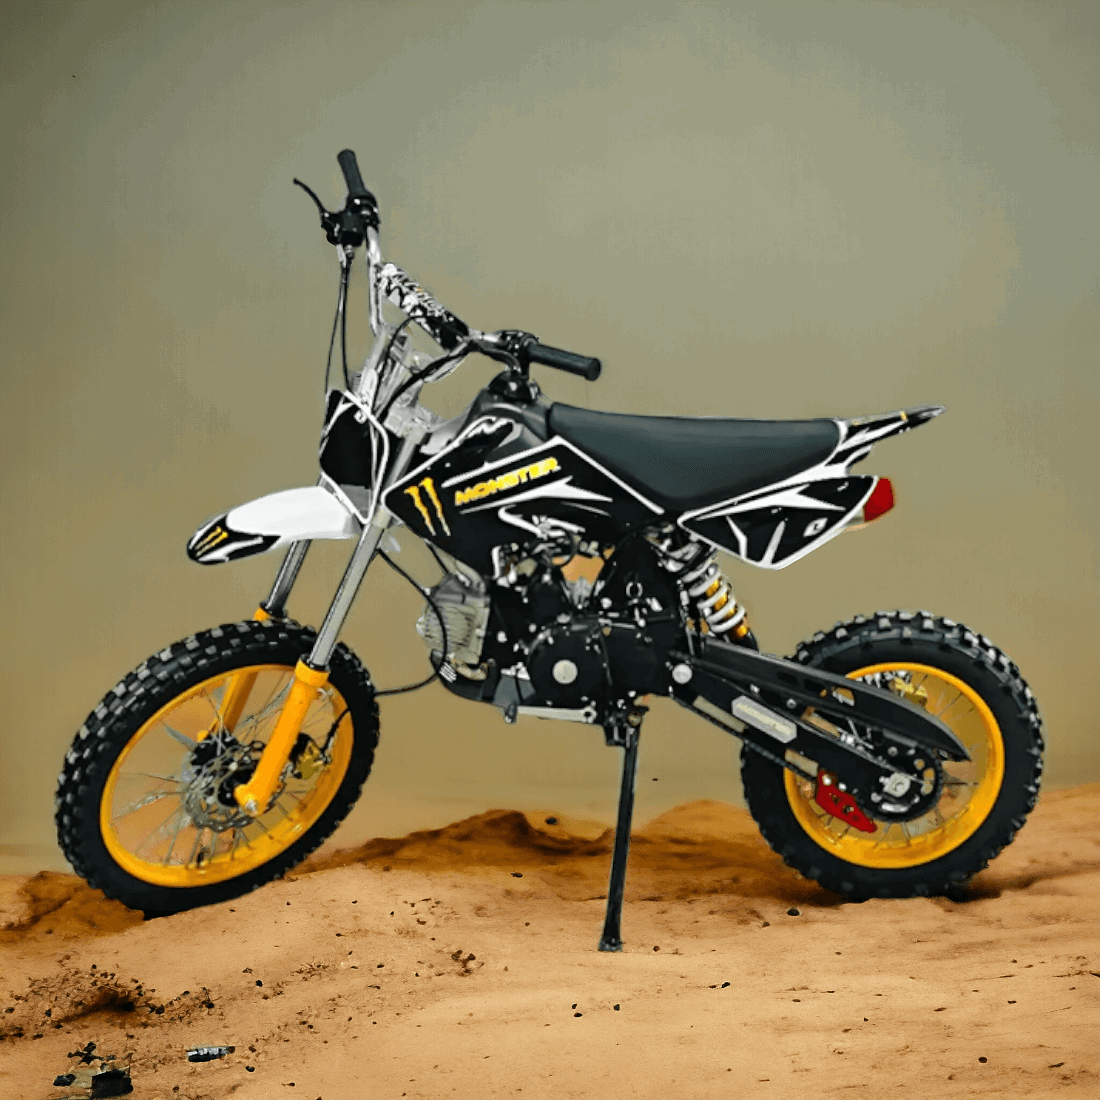 PATOYS | 125cc-Dirt bike Super Motocross for adults/youngsters 4 stroke engine for age group above 15 yrs Yellow Petrol Bike PATOYS